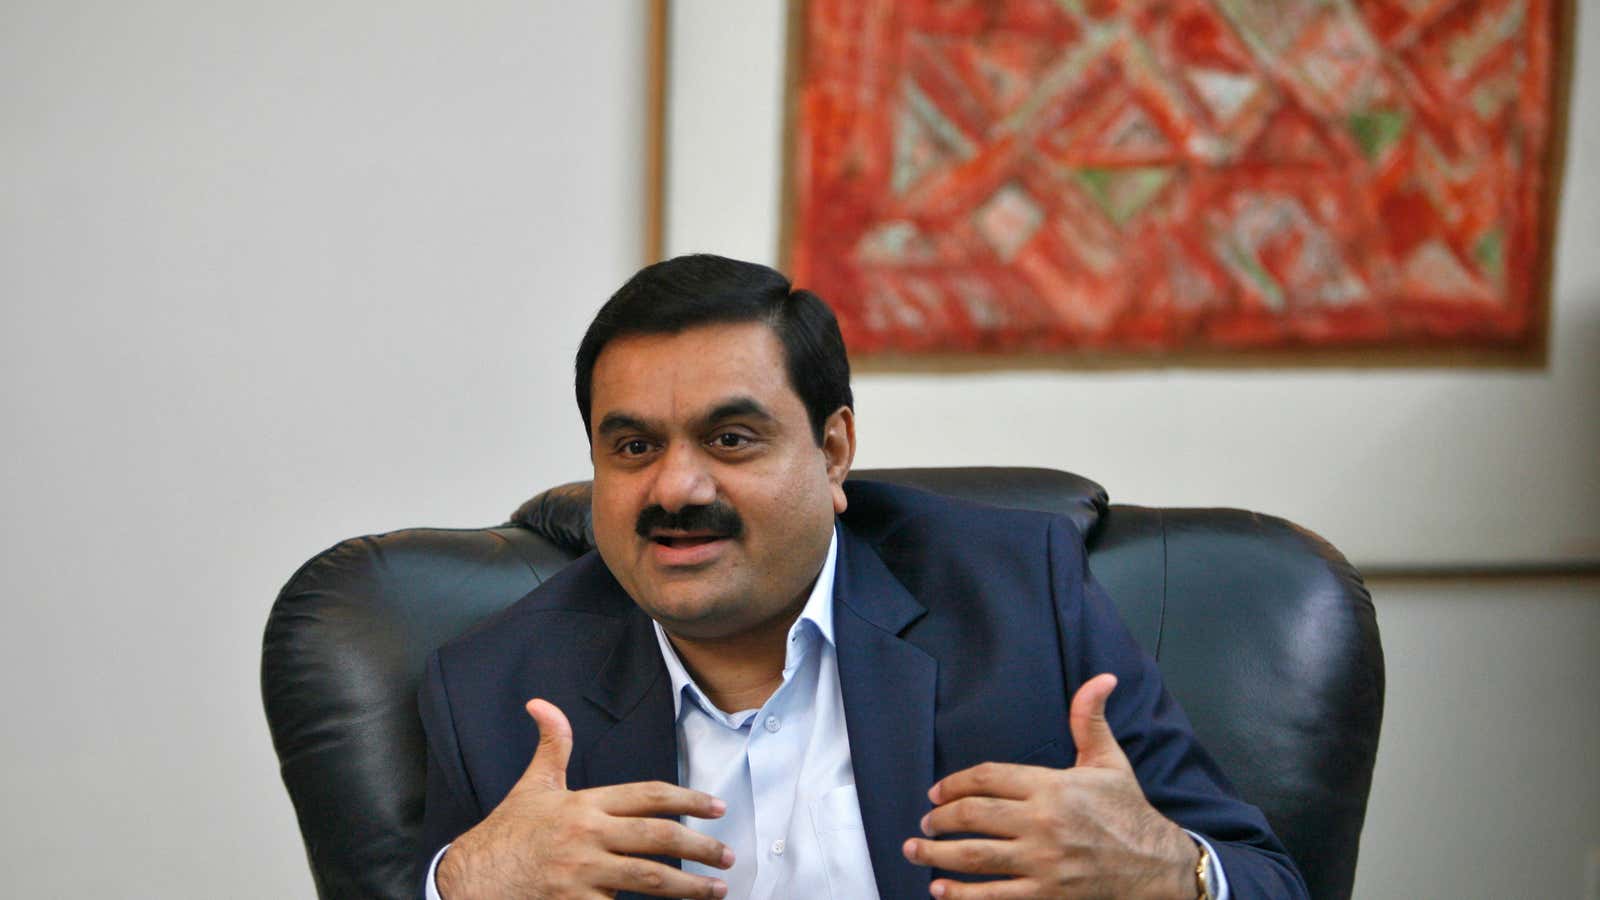 After canceling its share sale, Adani will have to rein in its spending